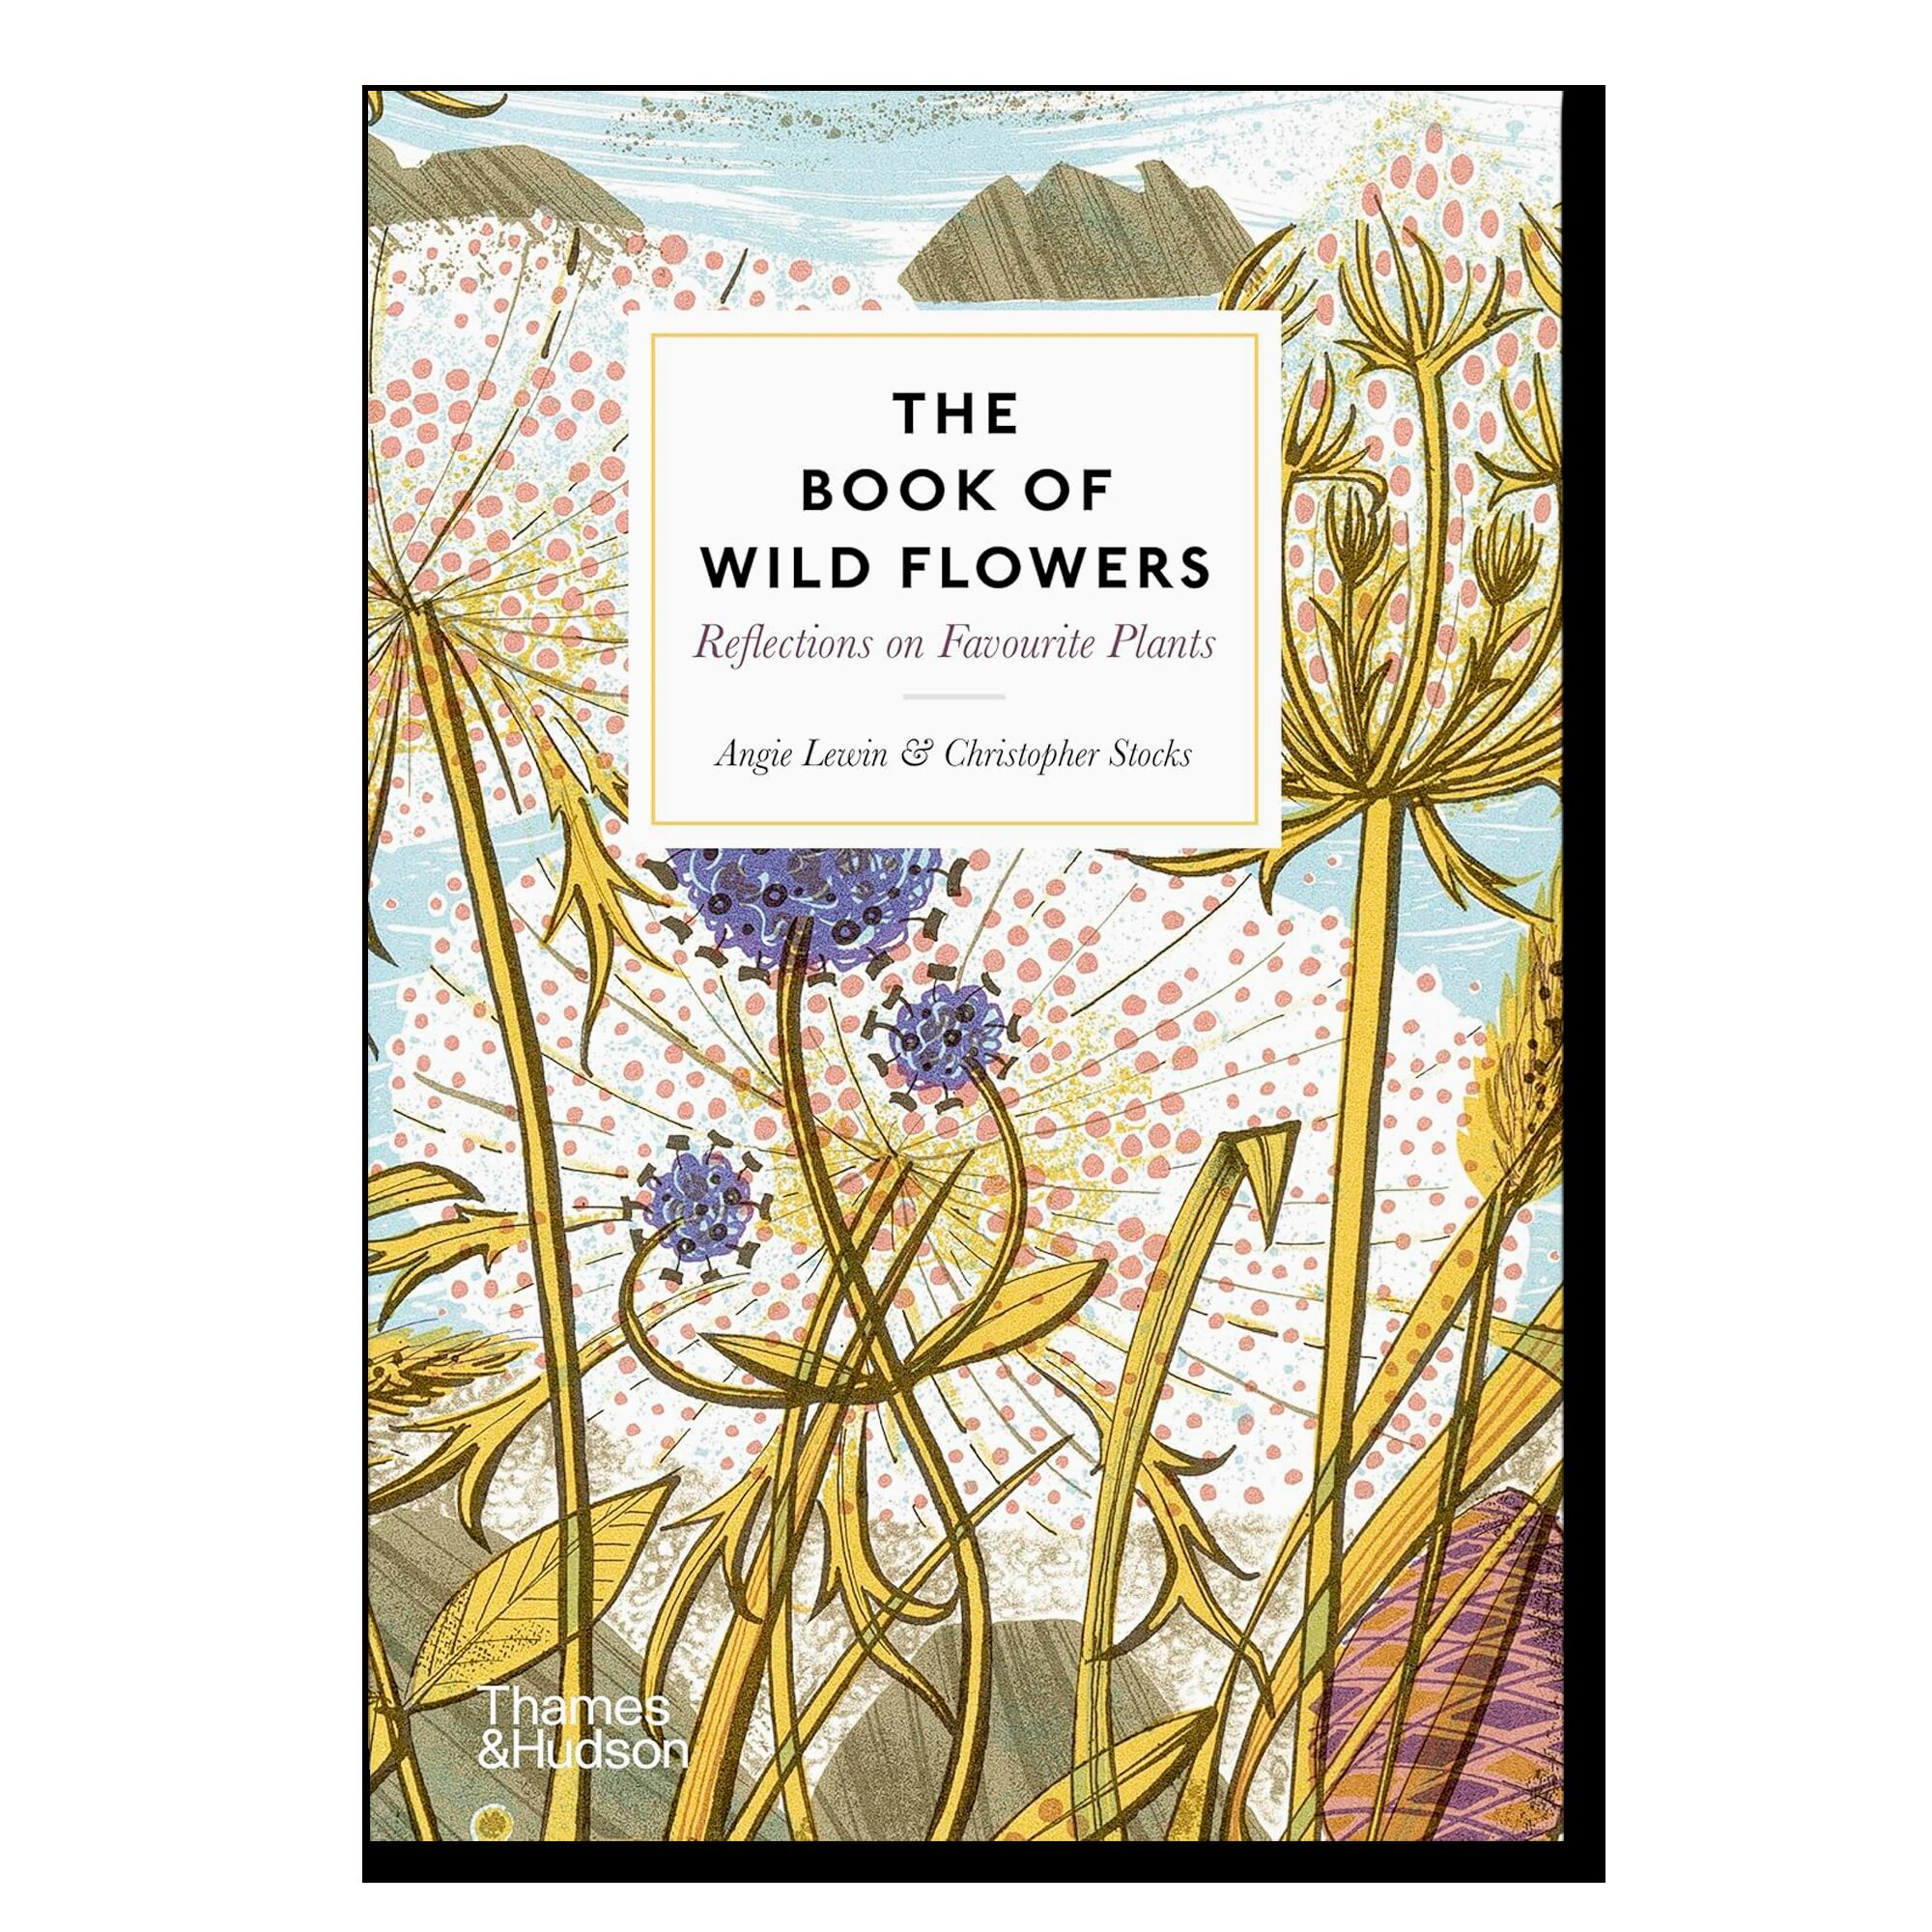 The Book of Wild Flowers: Reflections on Favorite Plants